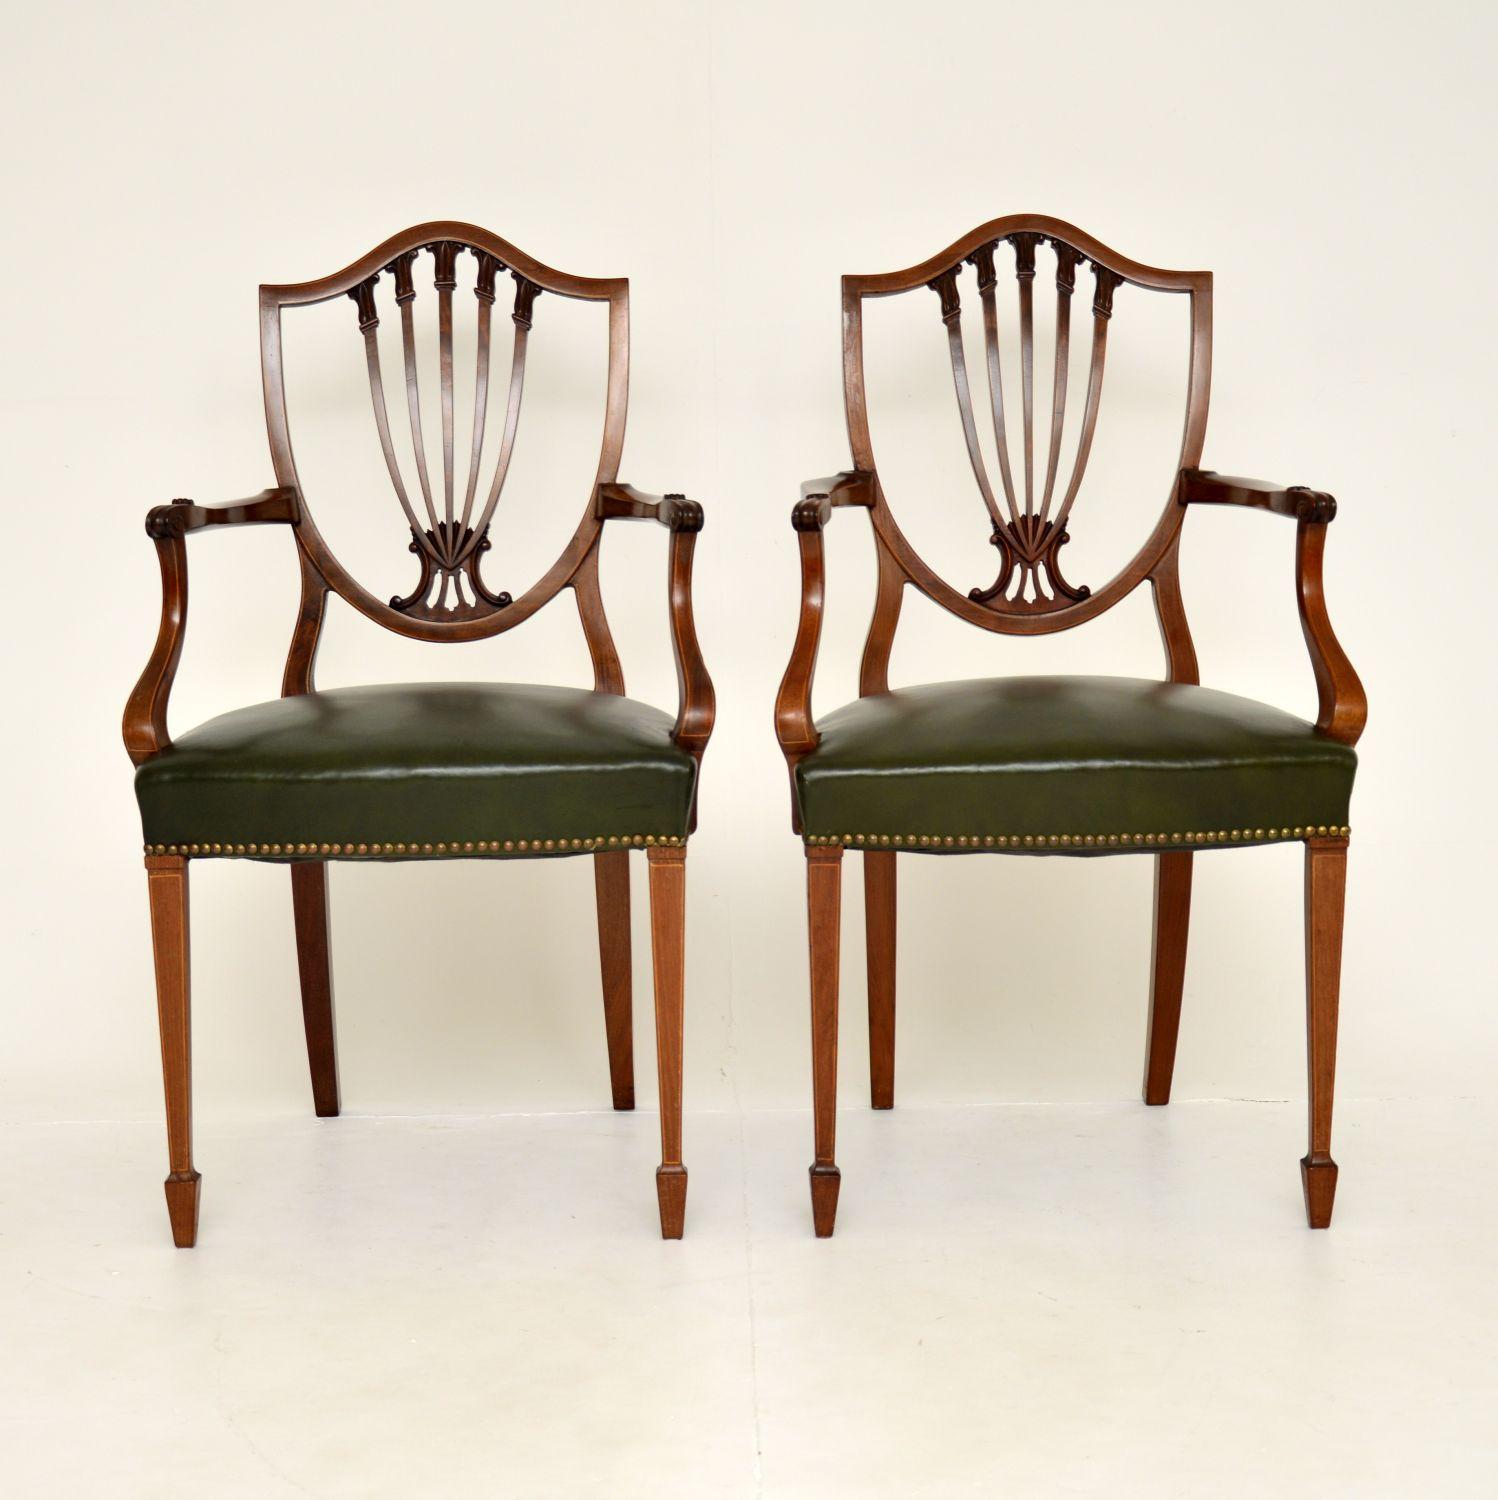 A stunning pair of shield back wood carver chairs with green leather seats. These are in the Sheraton style, they were made in England and date from around the 1900-1910 period.

They are of amazing quality, with a beautiful and elegant design.